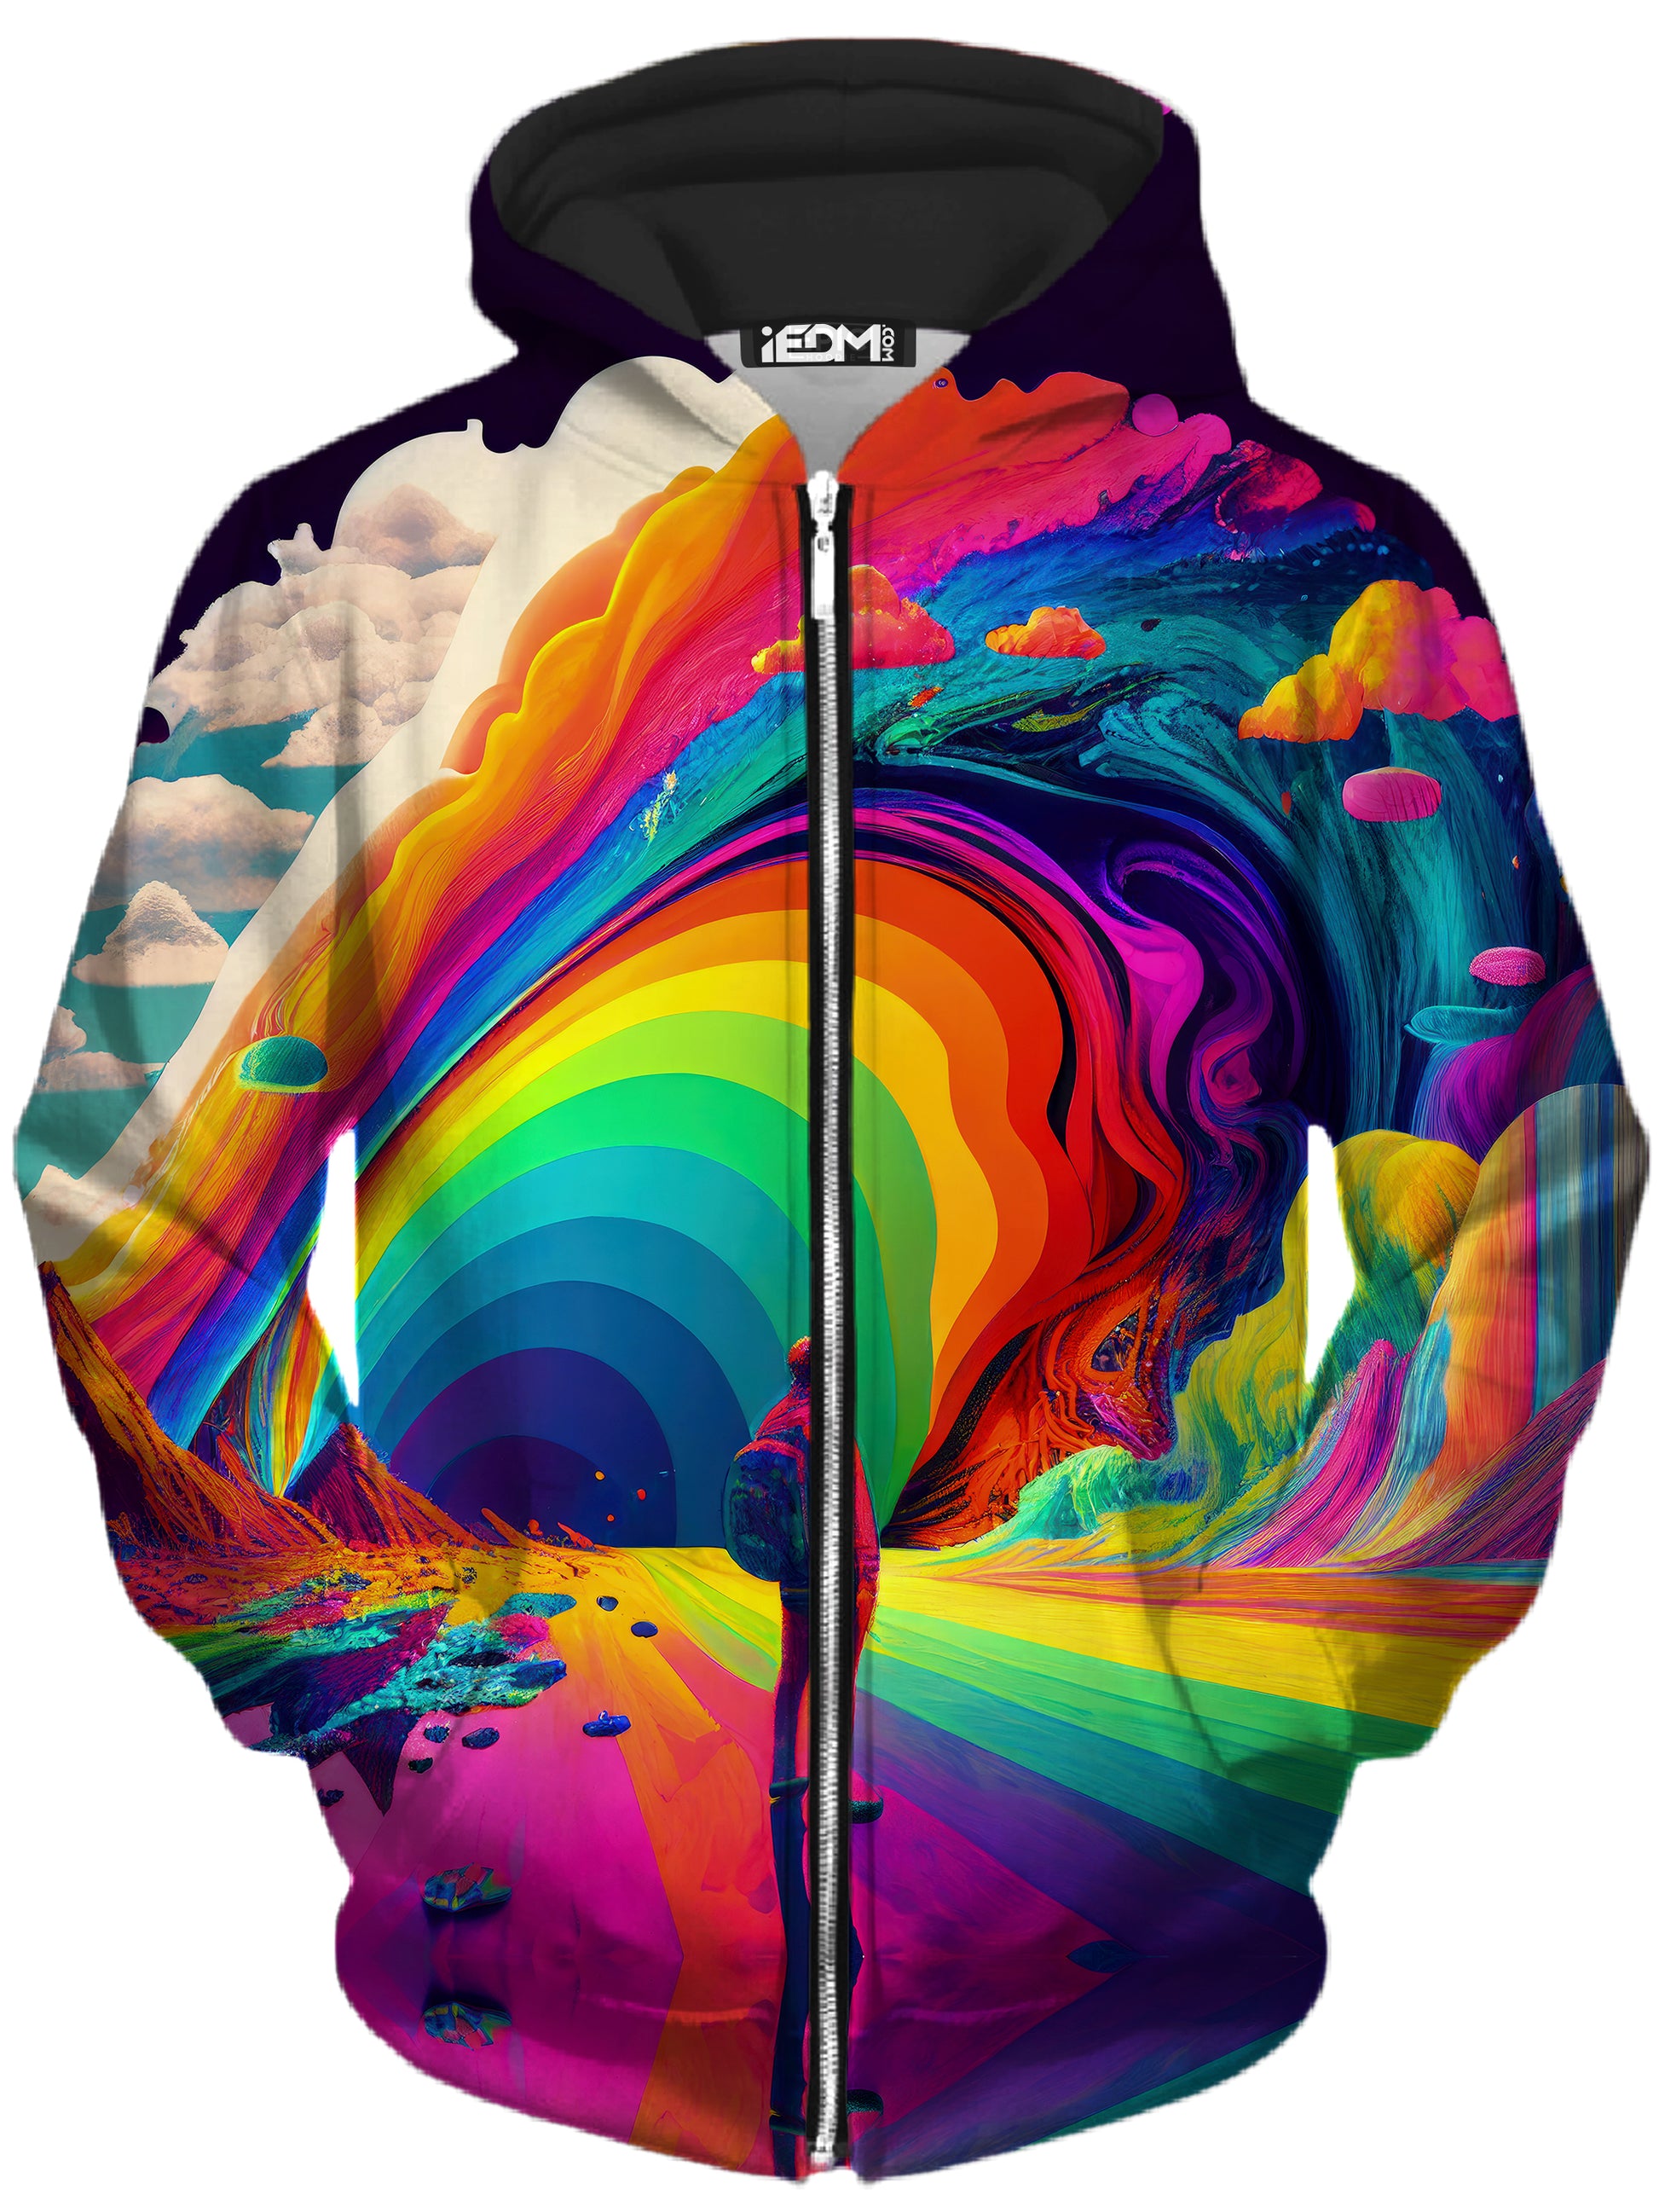 We Are All Mad Here Unisex Zip-Up Hoodie, iEDM, | iEDM